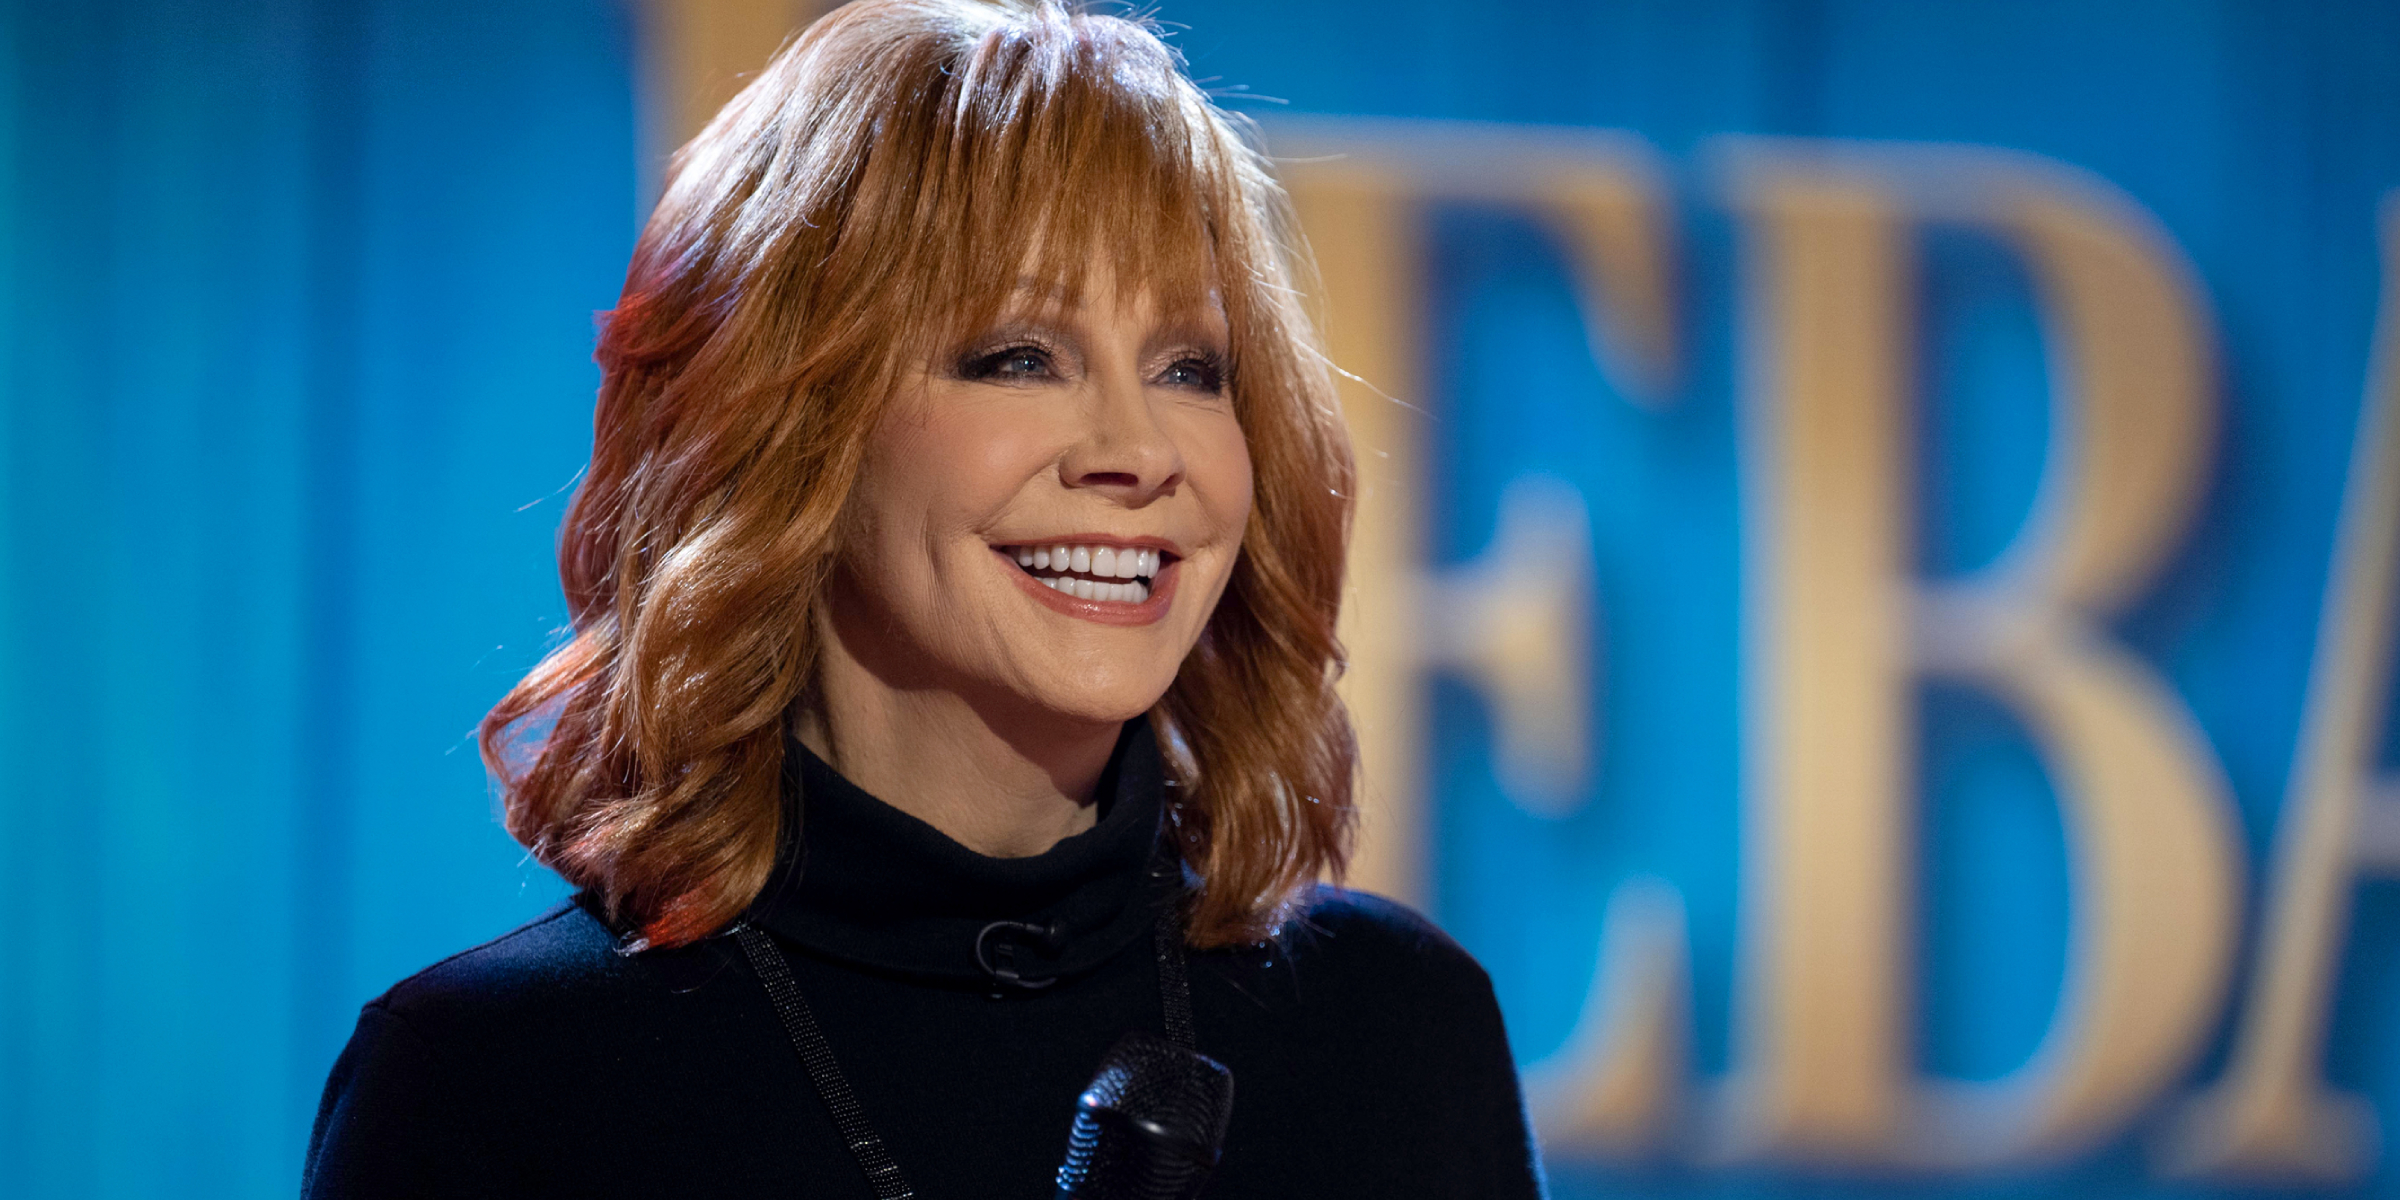 Reba McEntire | Source: Getty Images